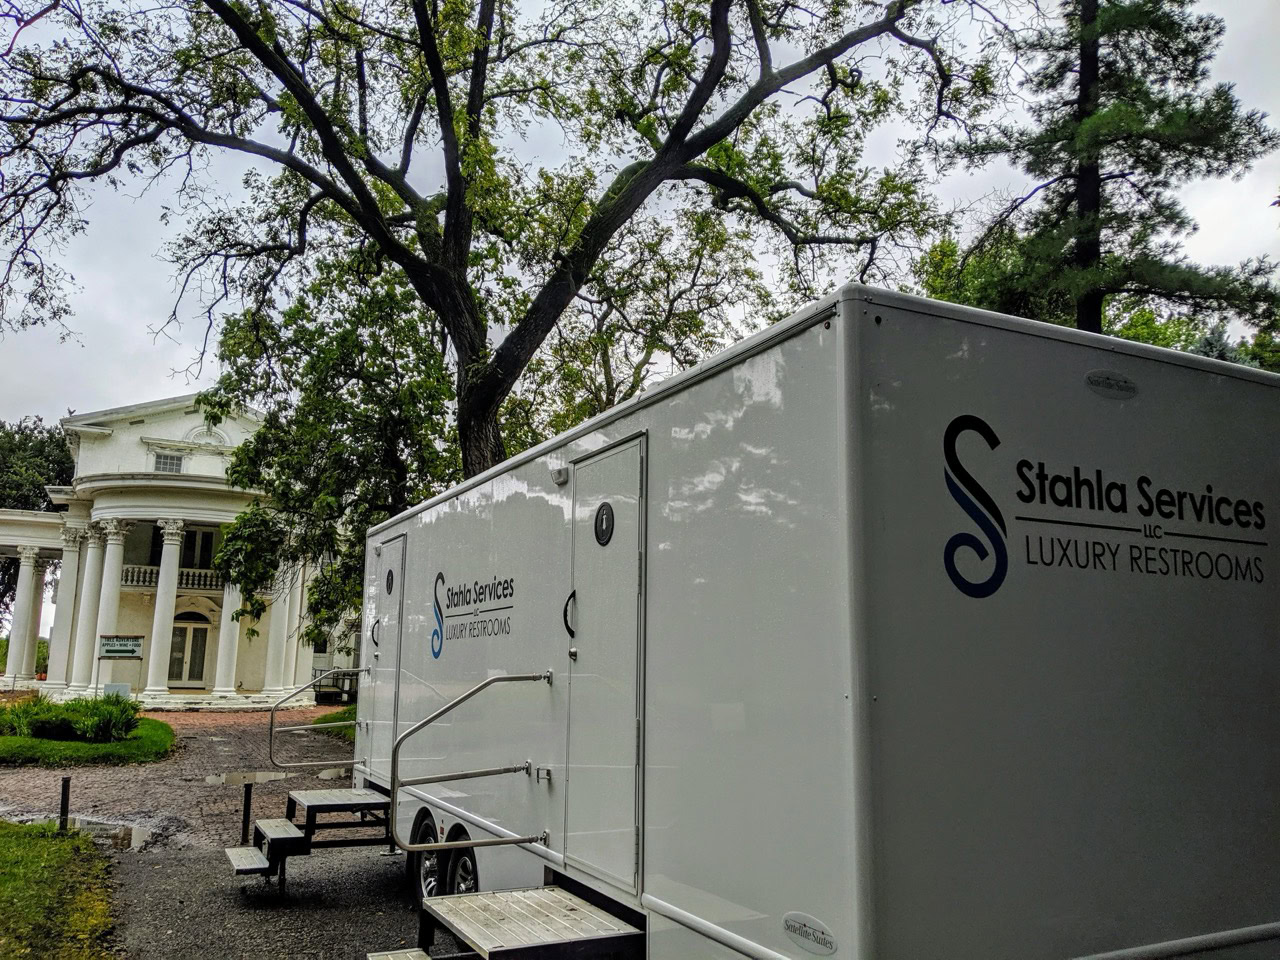 a 10 stall restroom trailer from stahla services is parked near a large, white, classical style building surrounded by trees.